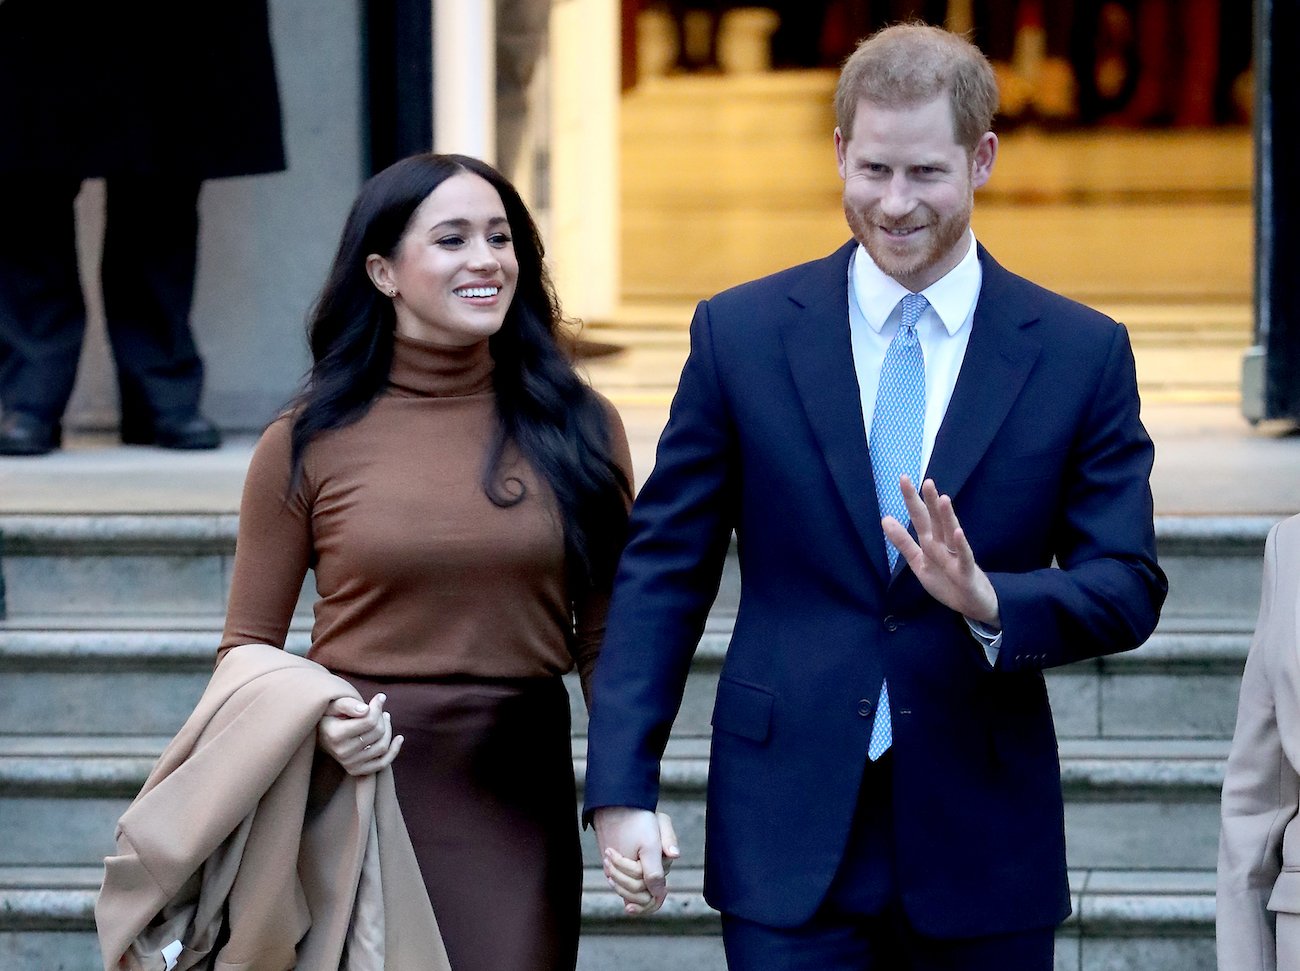 Prince Harry and Meghan Markle hold hands and smile